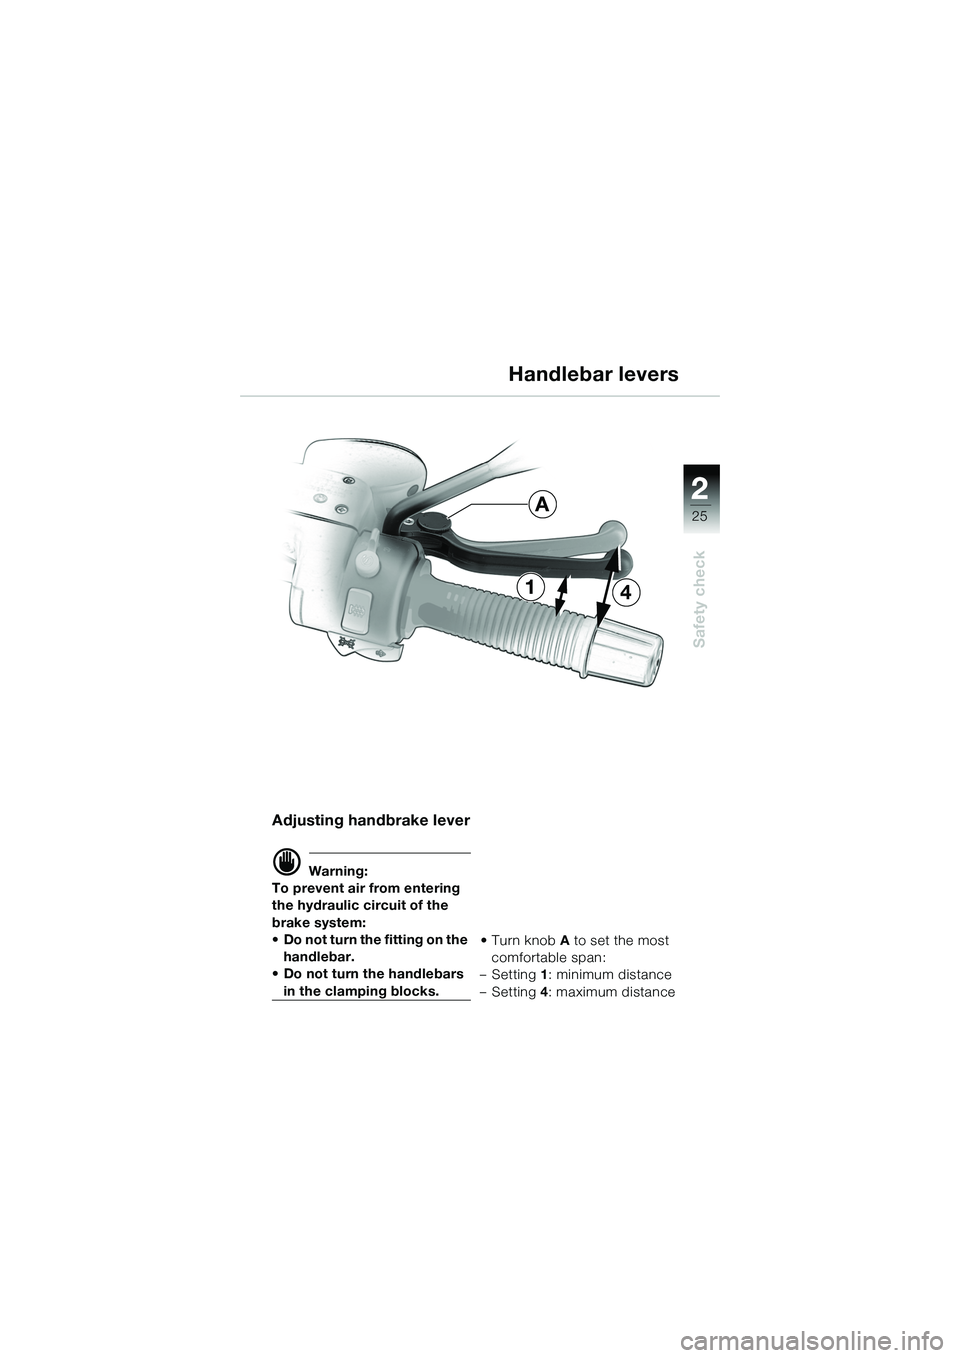 BMW MOTORRAD R 1150 R 2002  Riders Manual (in English) 2
25
2
Safety check
41
A
Adjusting handbrake lever
d Warning:
To prevent air from entering 
the hydraulic circuit of the 
brake system: 
• Do not turn the fitting on the  handlebar.
• Do not turn 